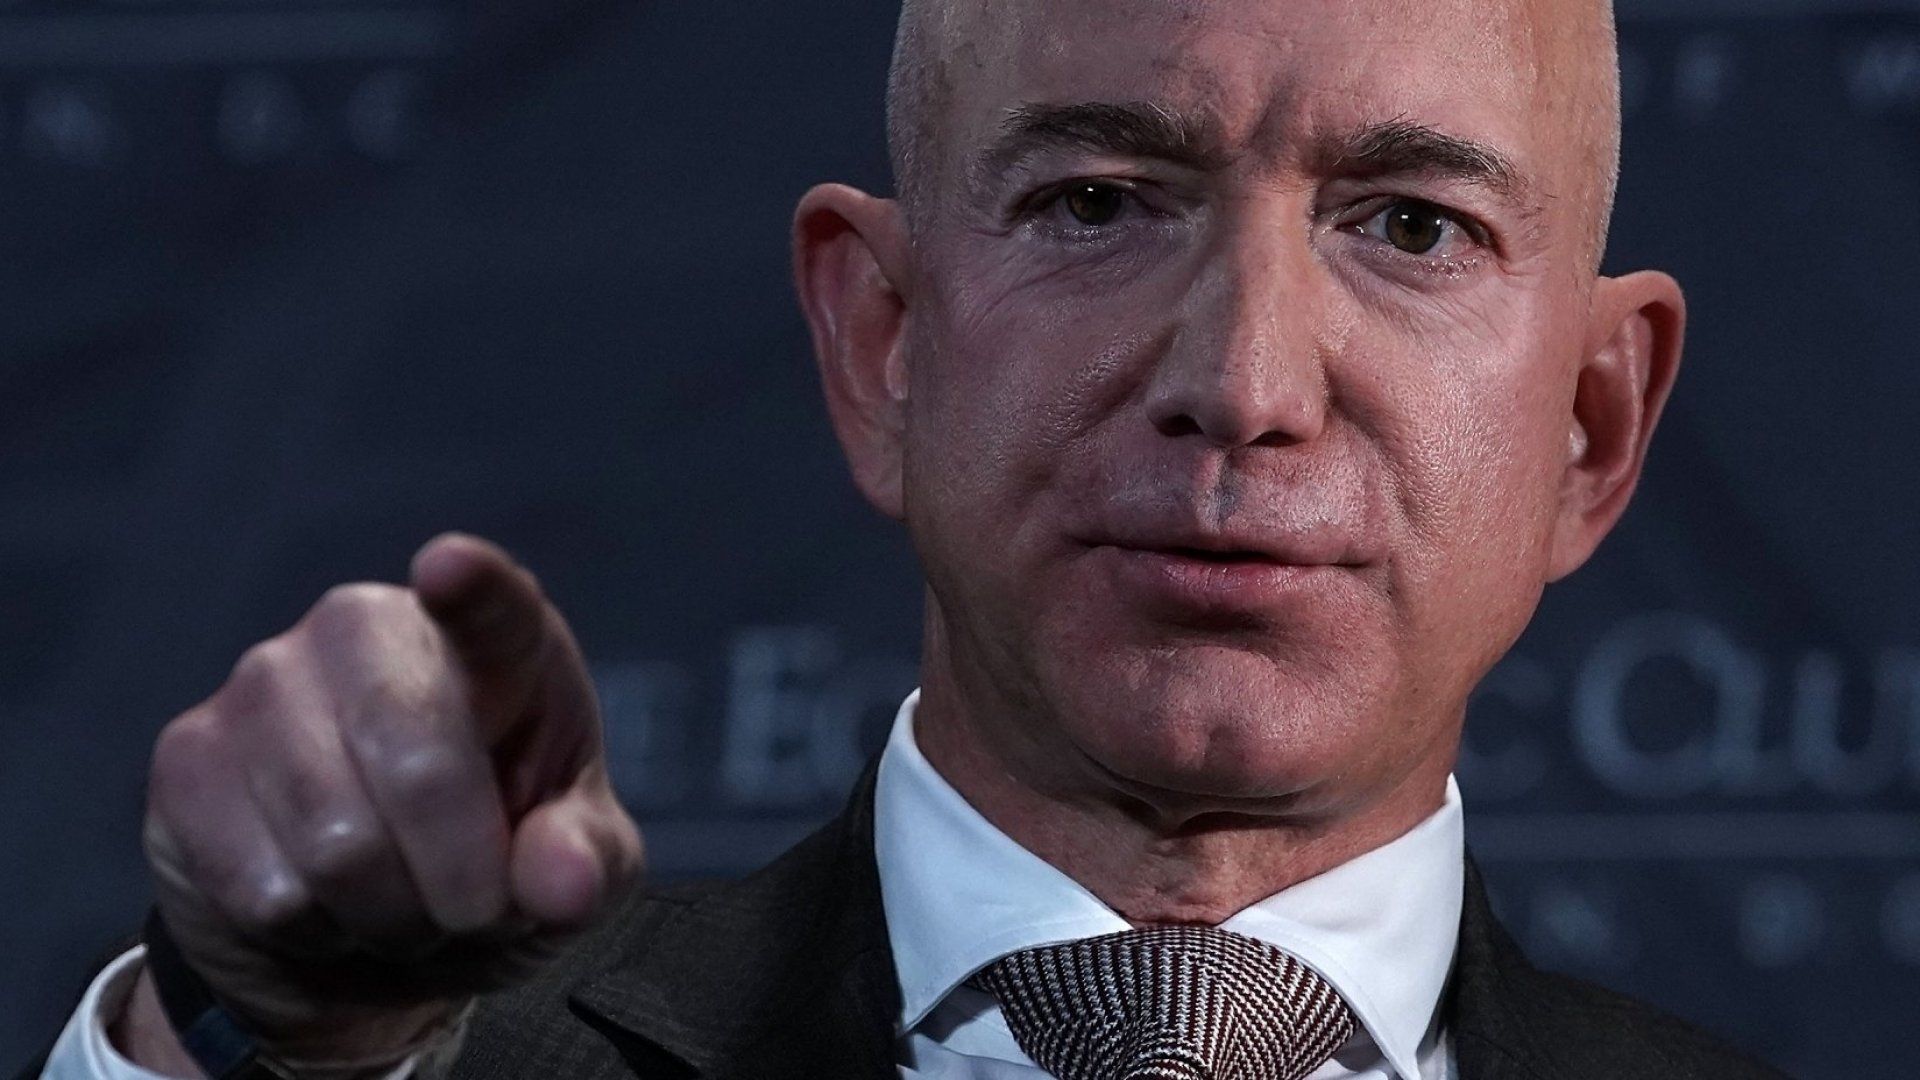 Jeff Bezos Quotes That Suddenly Take on a Whole New Meaning (After 2 Stunning Decisions)